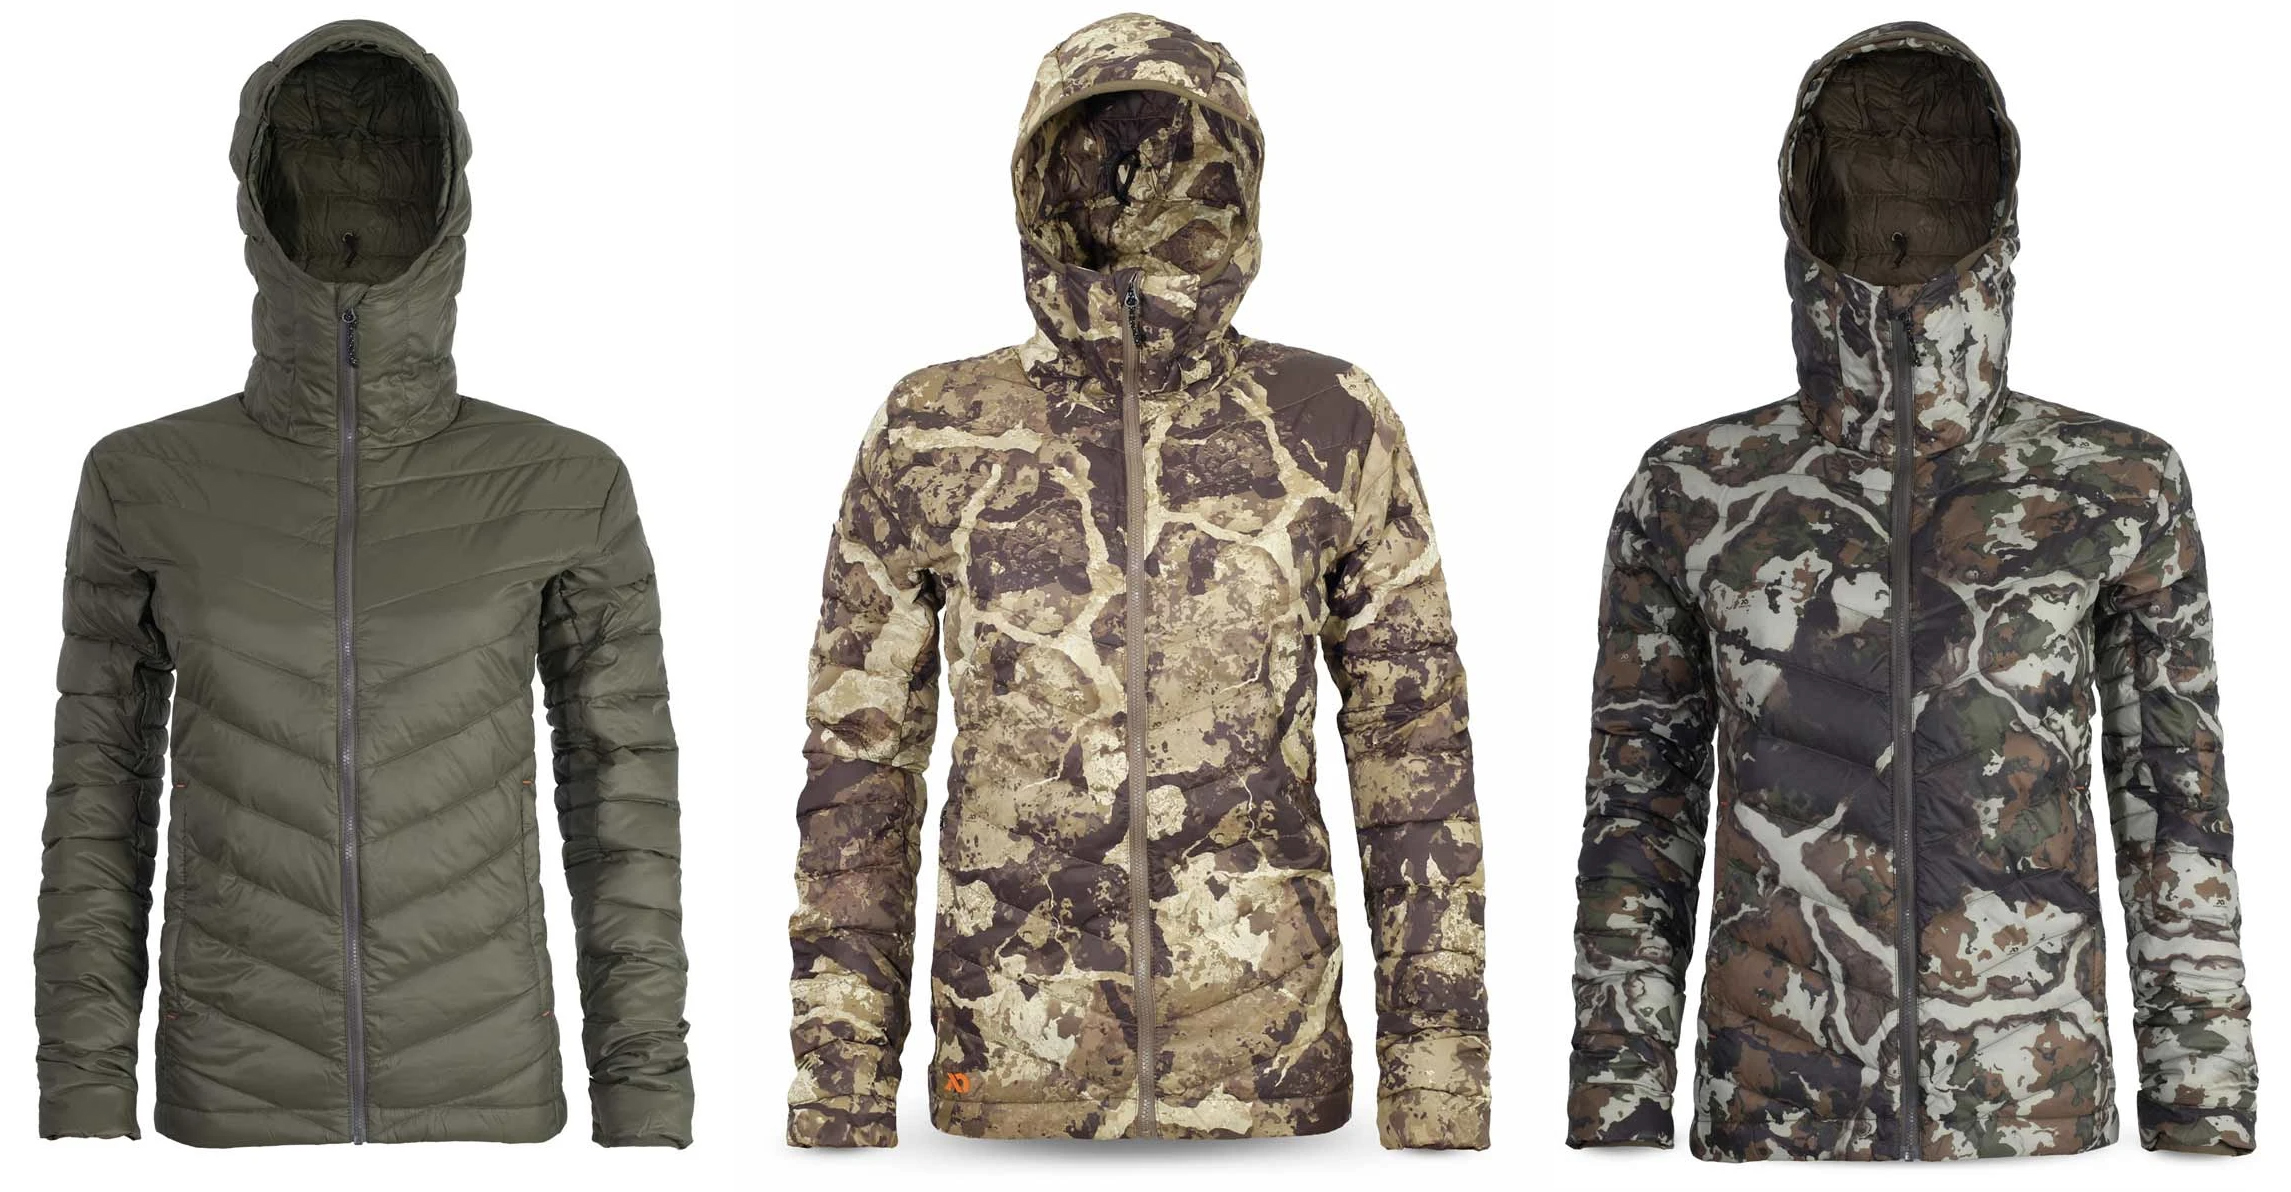 The Ultimate Hunting Gift Guide for Women